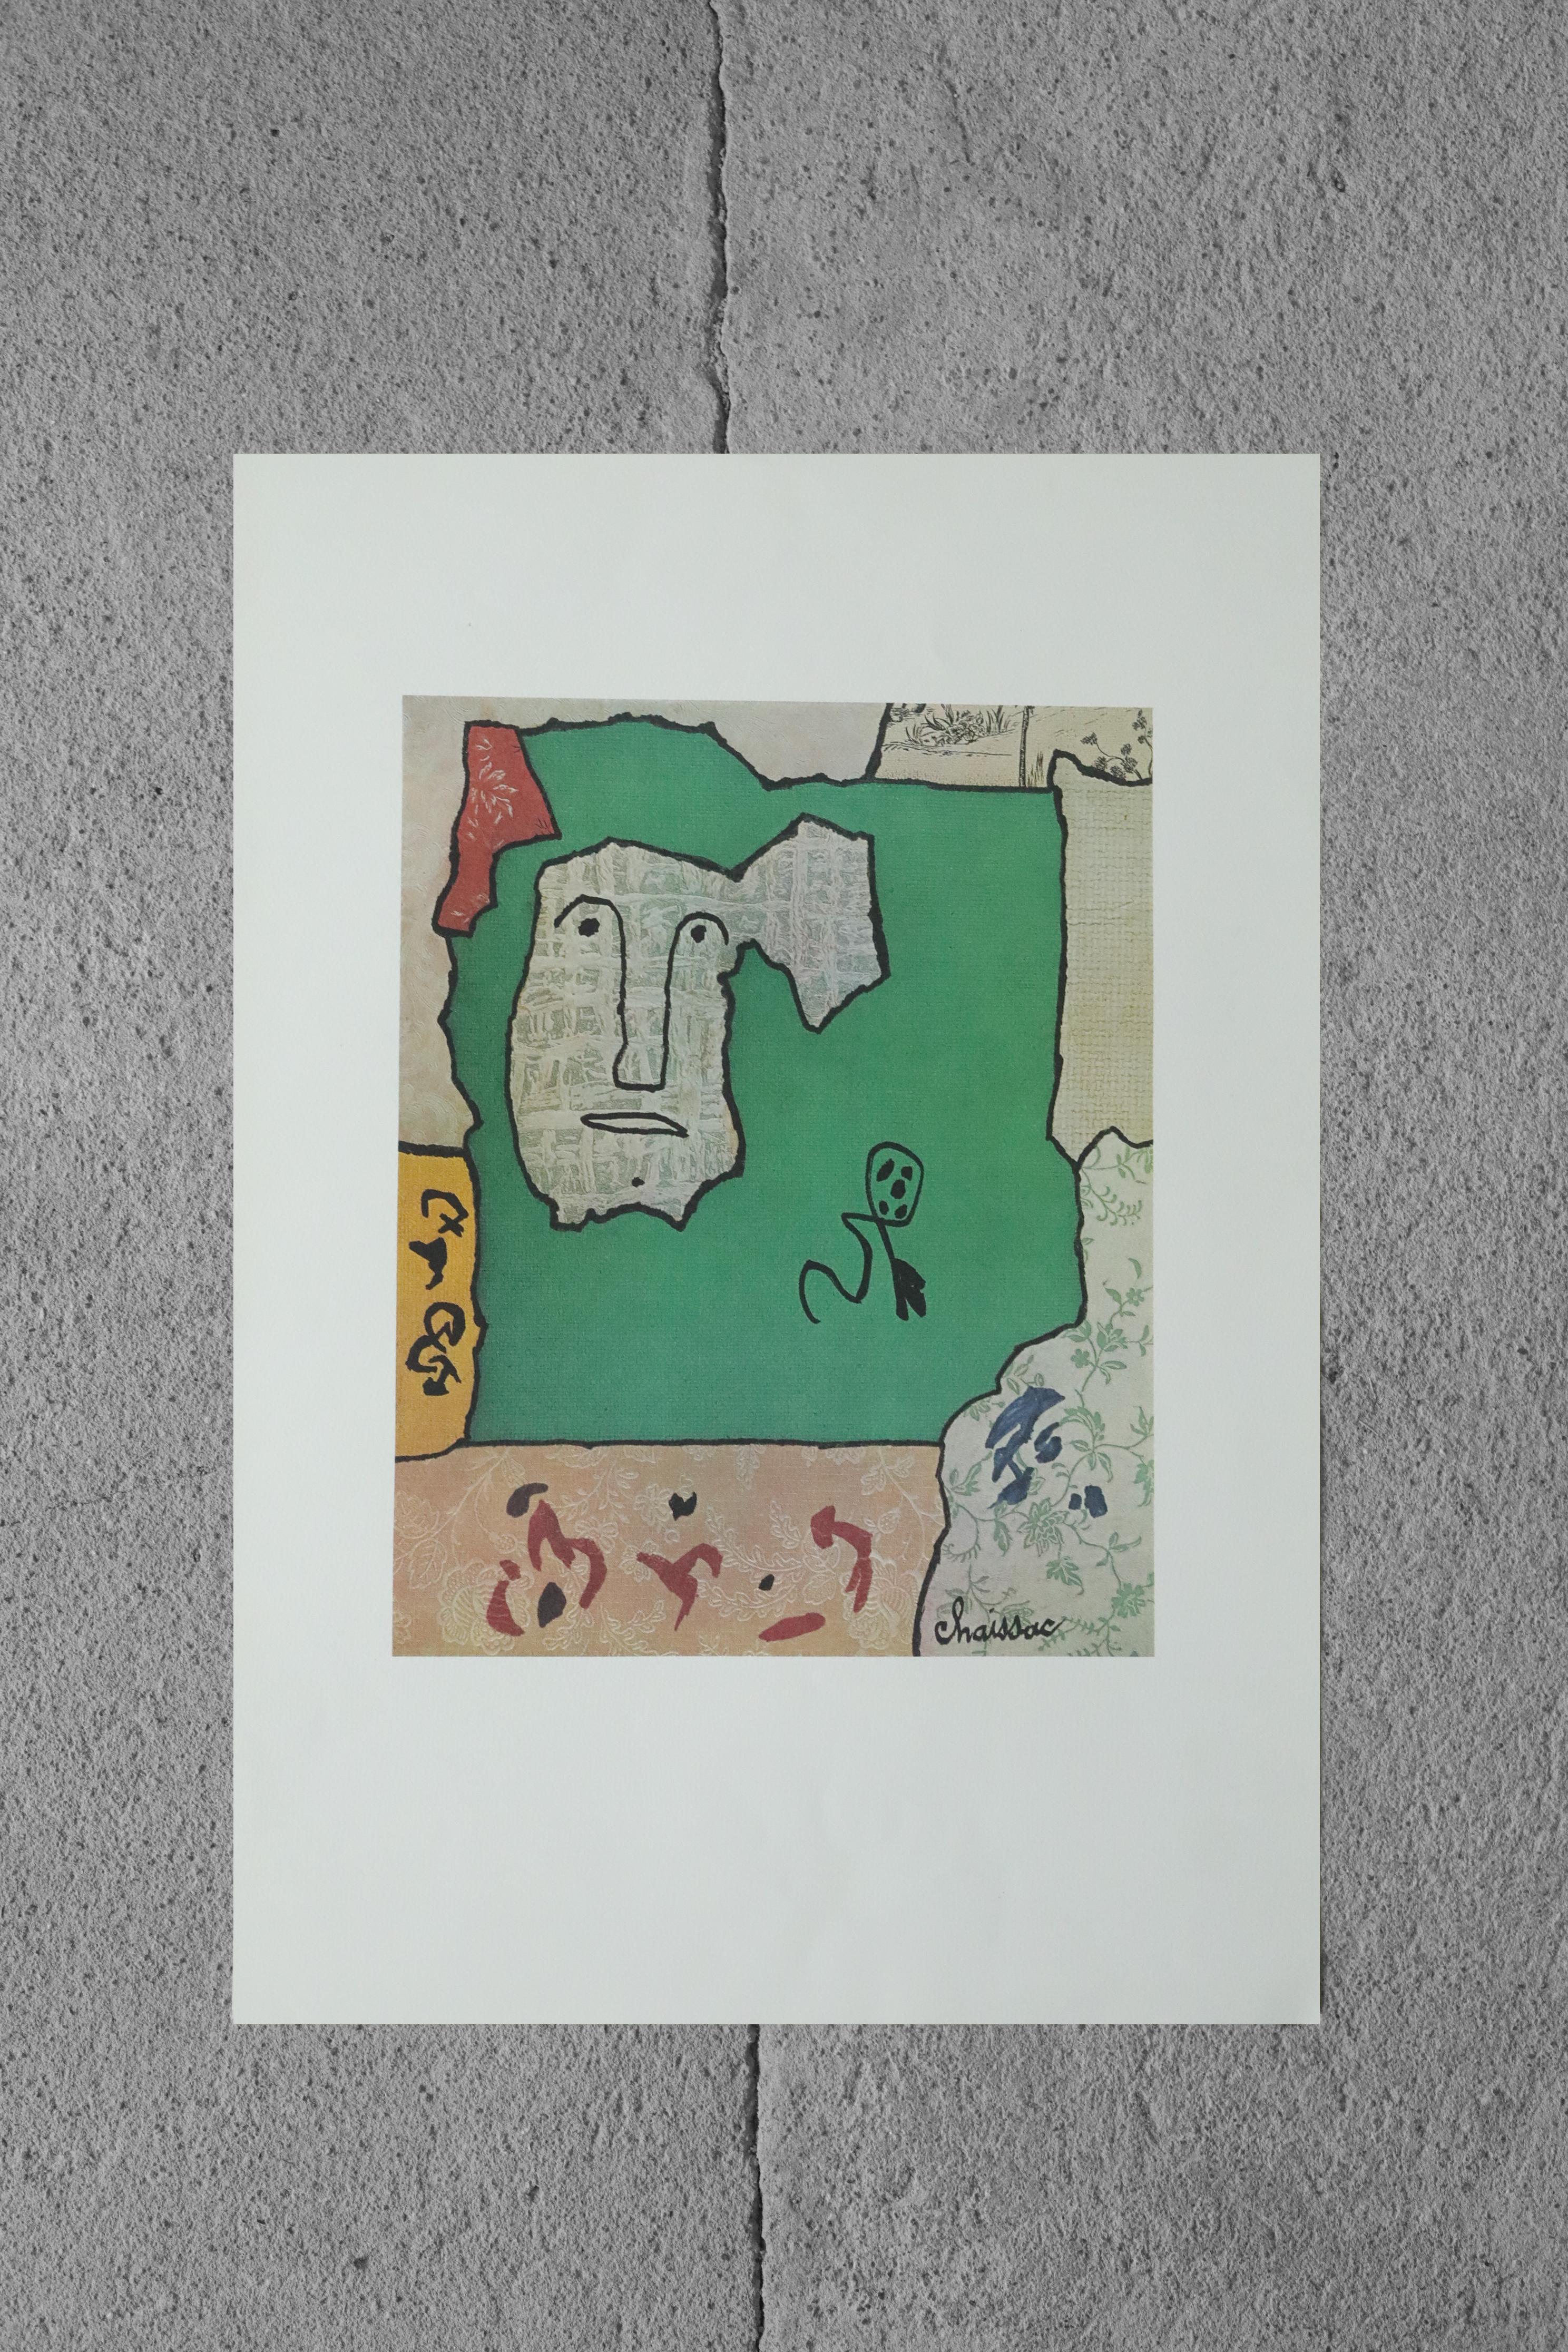 Gaston Chaissac, Lithographic Print, Composition with Face, 1960s